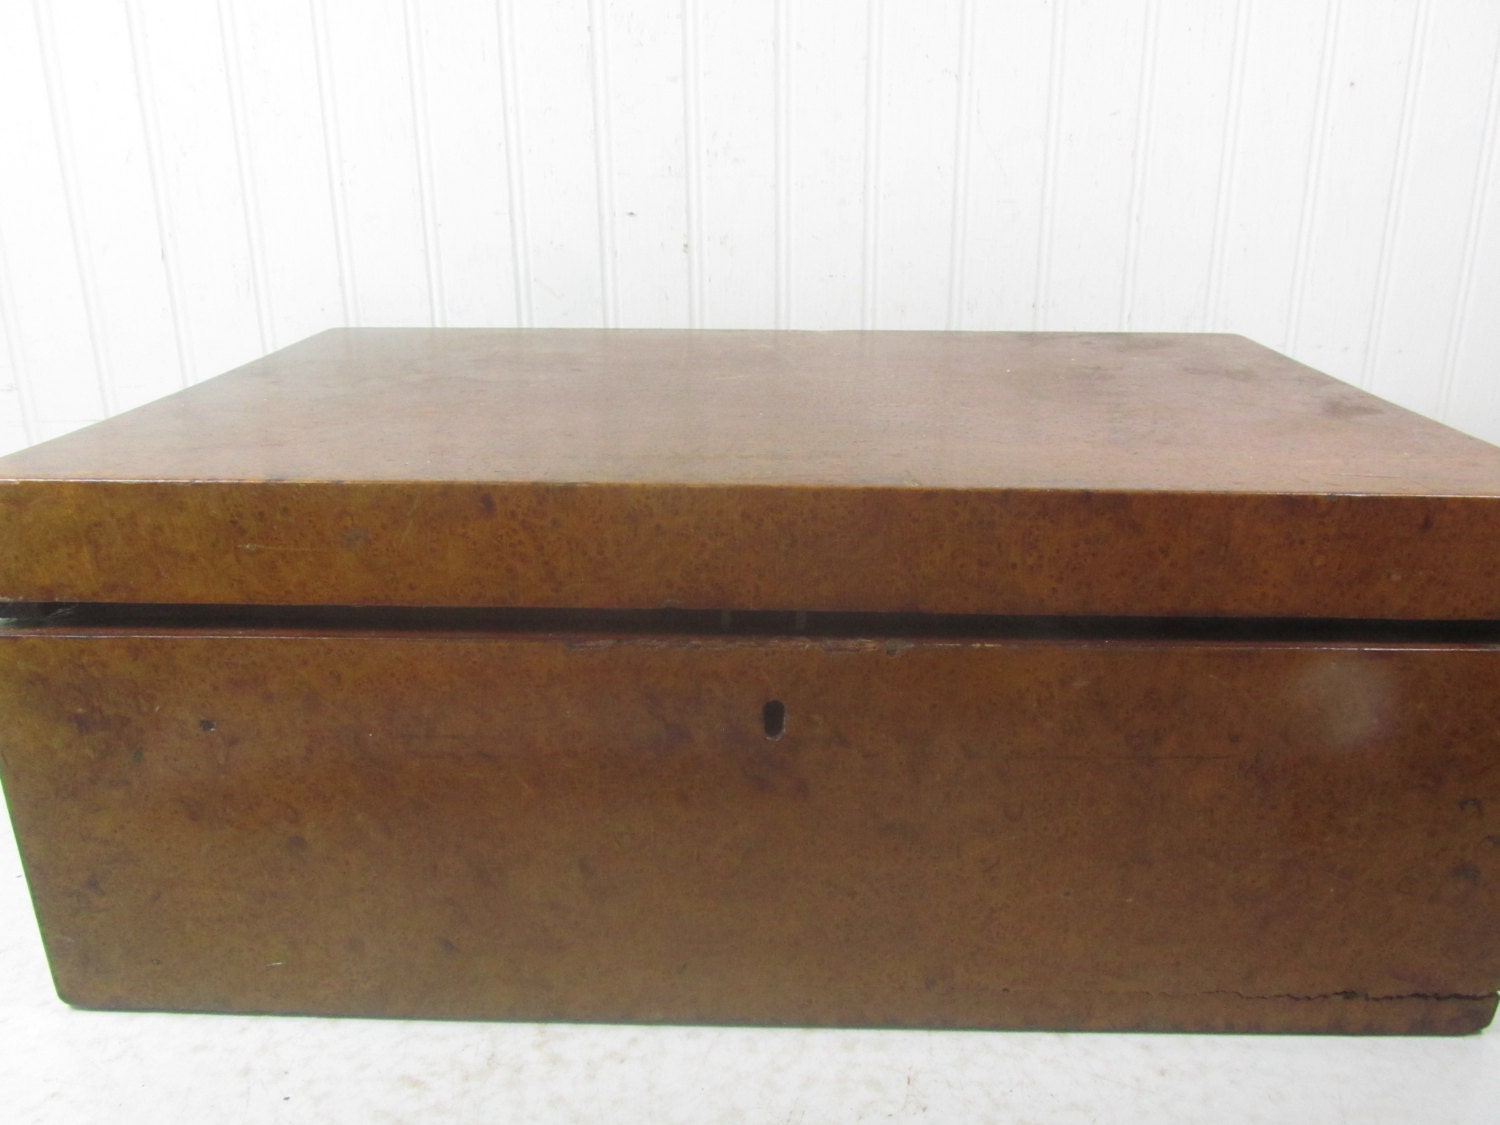 Vintage Portable Writing Desk - The Cultivated Avenue